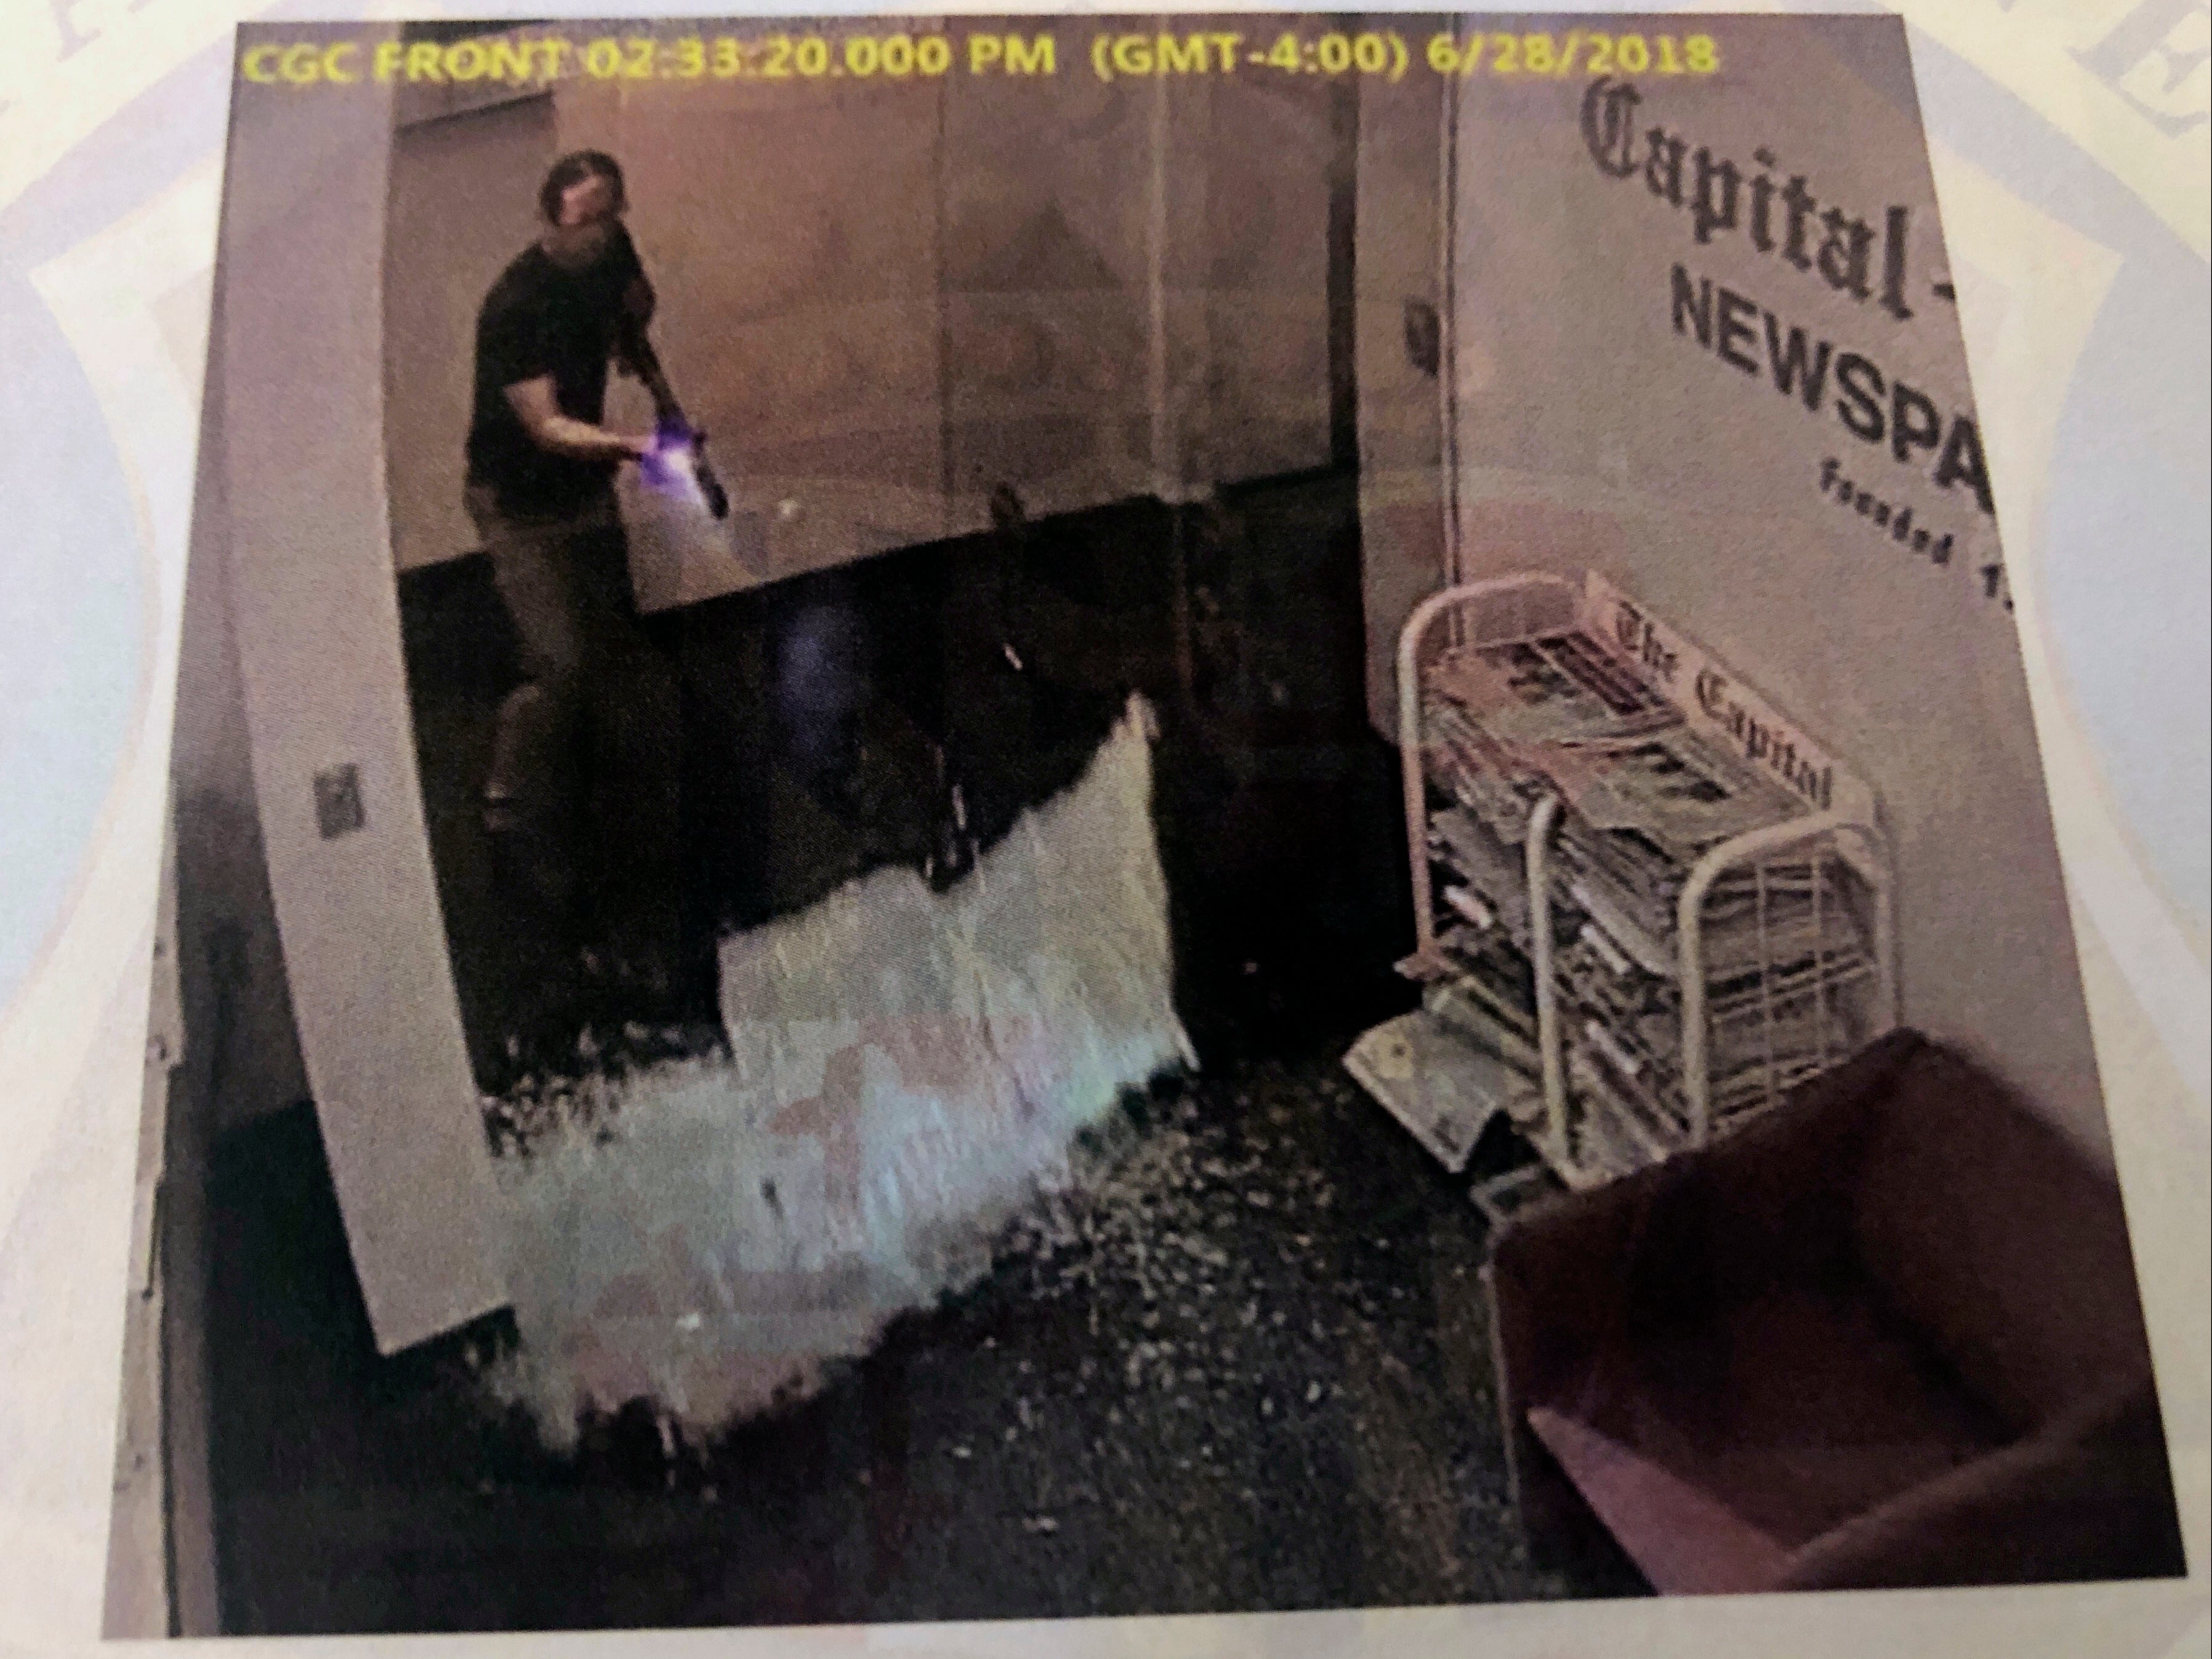 This photograph of an image in court evidence made public on Tuesday, June 29, 2021, from surveillance video, shows what authorities say is Jarrod Ramos shooting open the door of the Capital Gazette office on June 28, 2018, in Annapolis, Md.